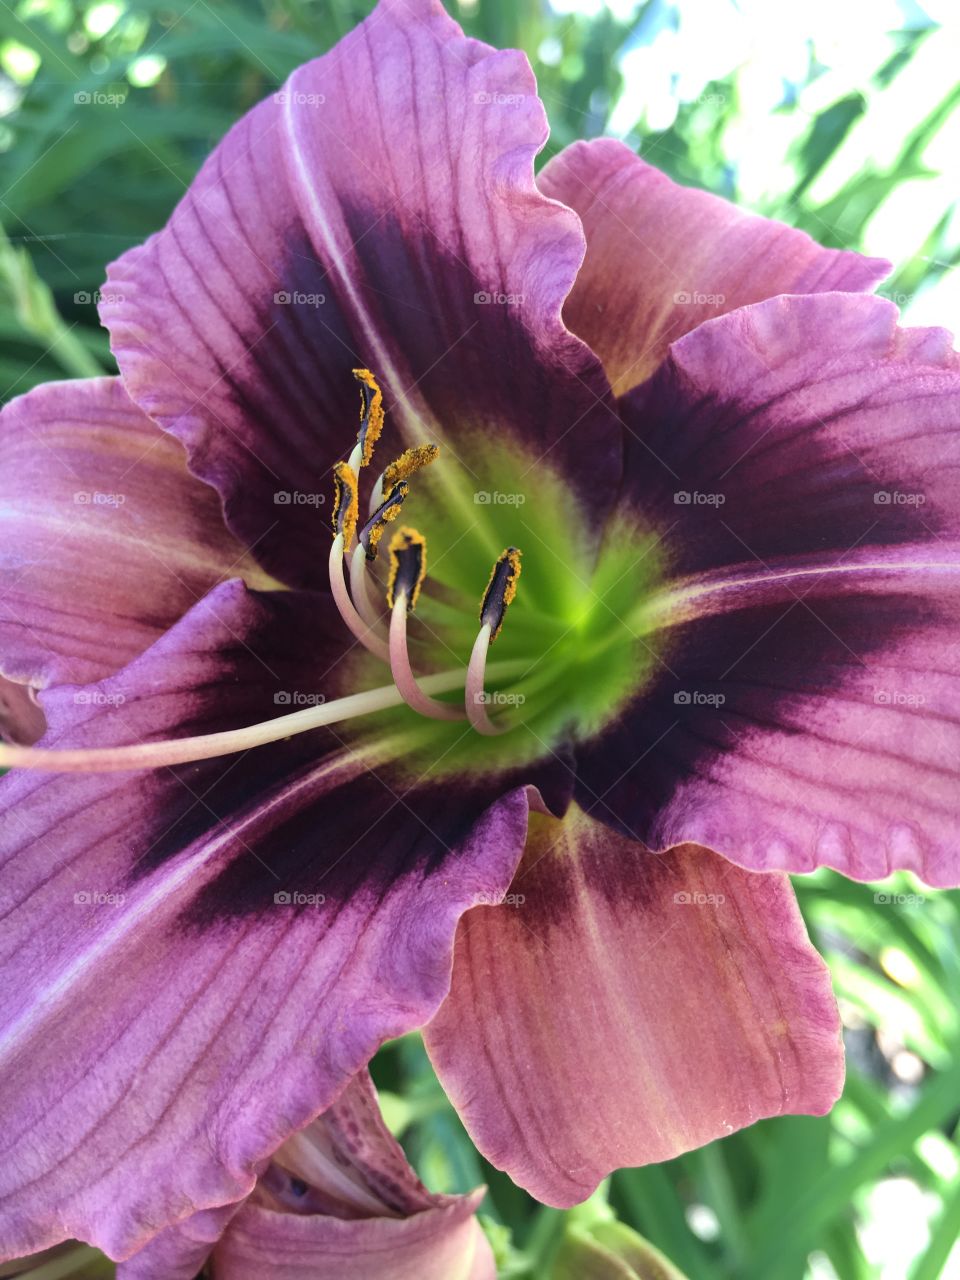 My day lilies are in bloom! 